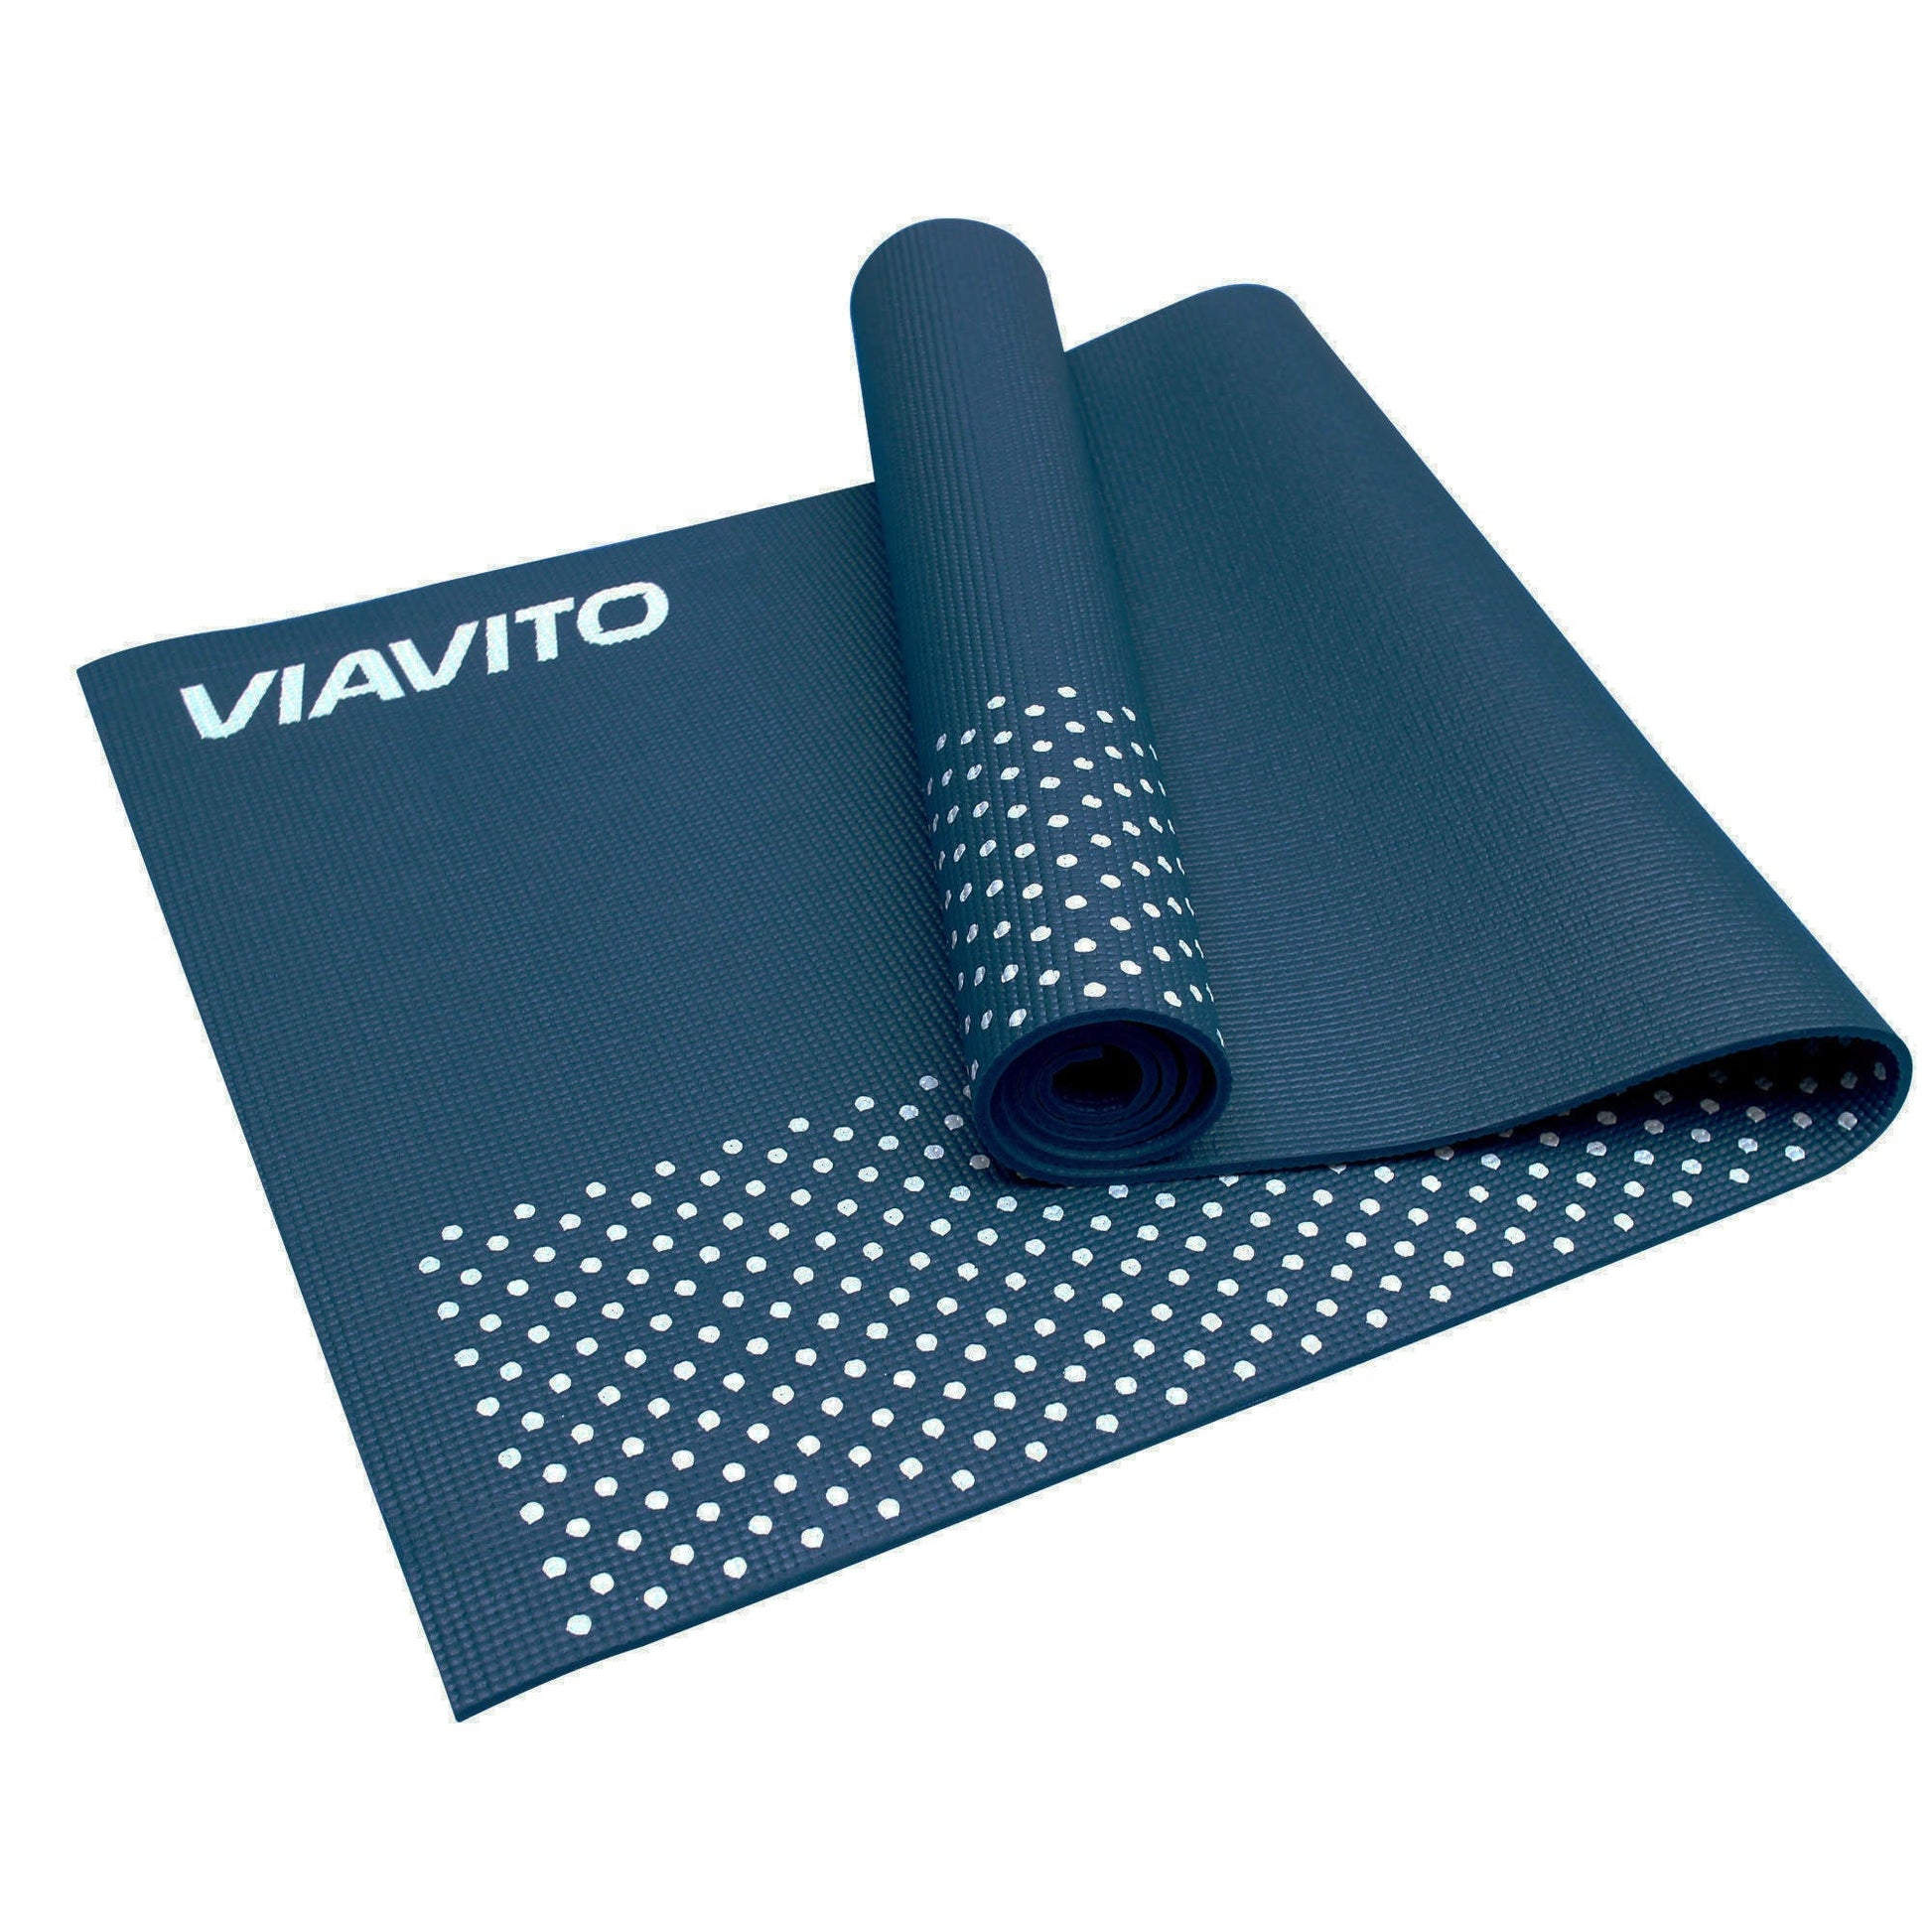 Upward Fit Classic Yoga Mat (68x 24x 4mm) - 10 Pack - with carrying straps